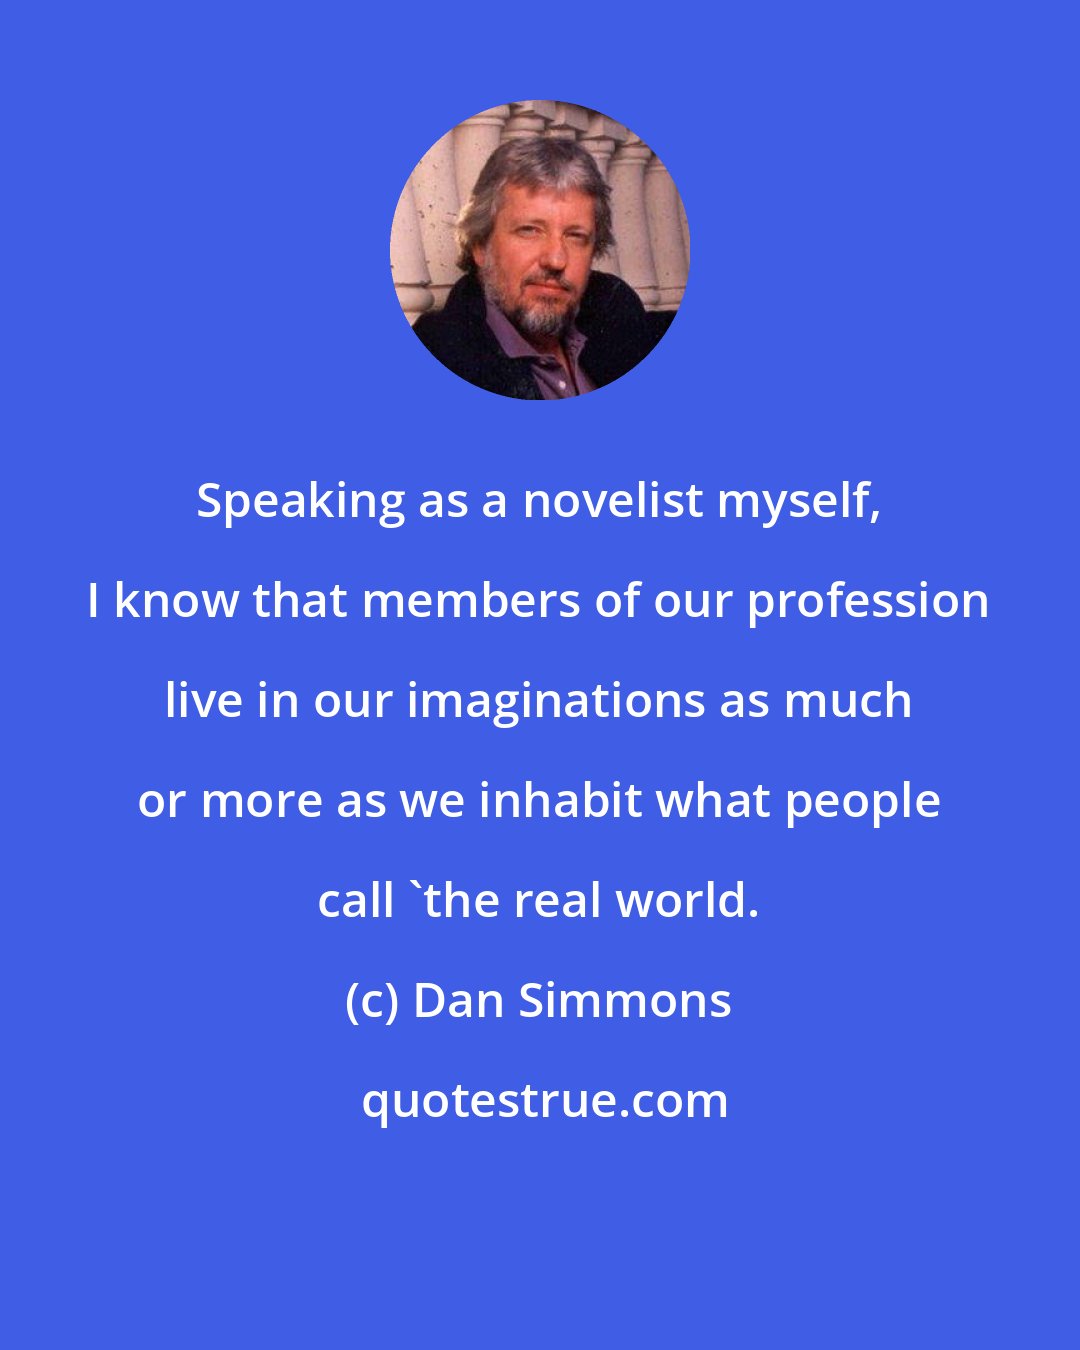 Dan Simmons: Speaking as a novelist myself, I know that members of our profession live in our imaginations as much or more as we inhabit what people call 'the real world.